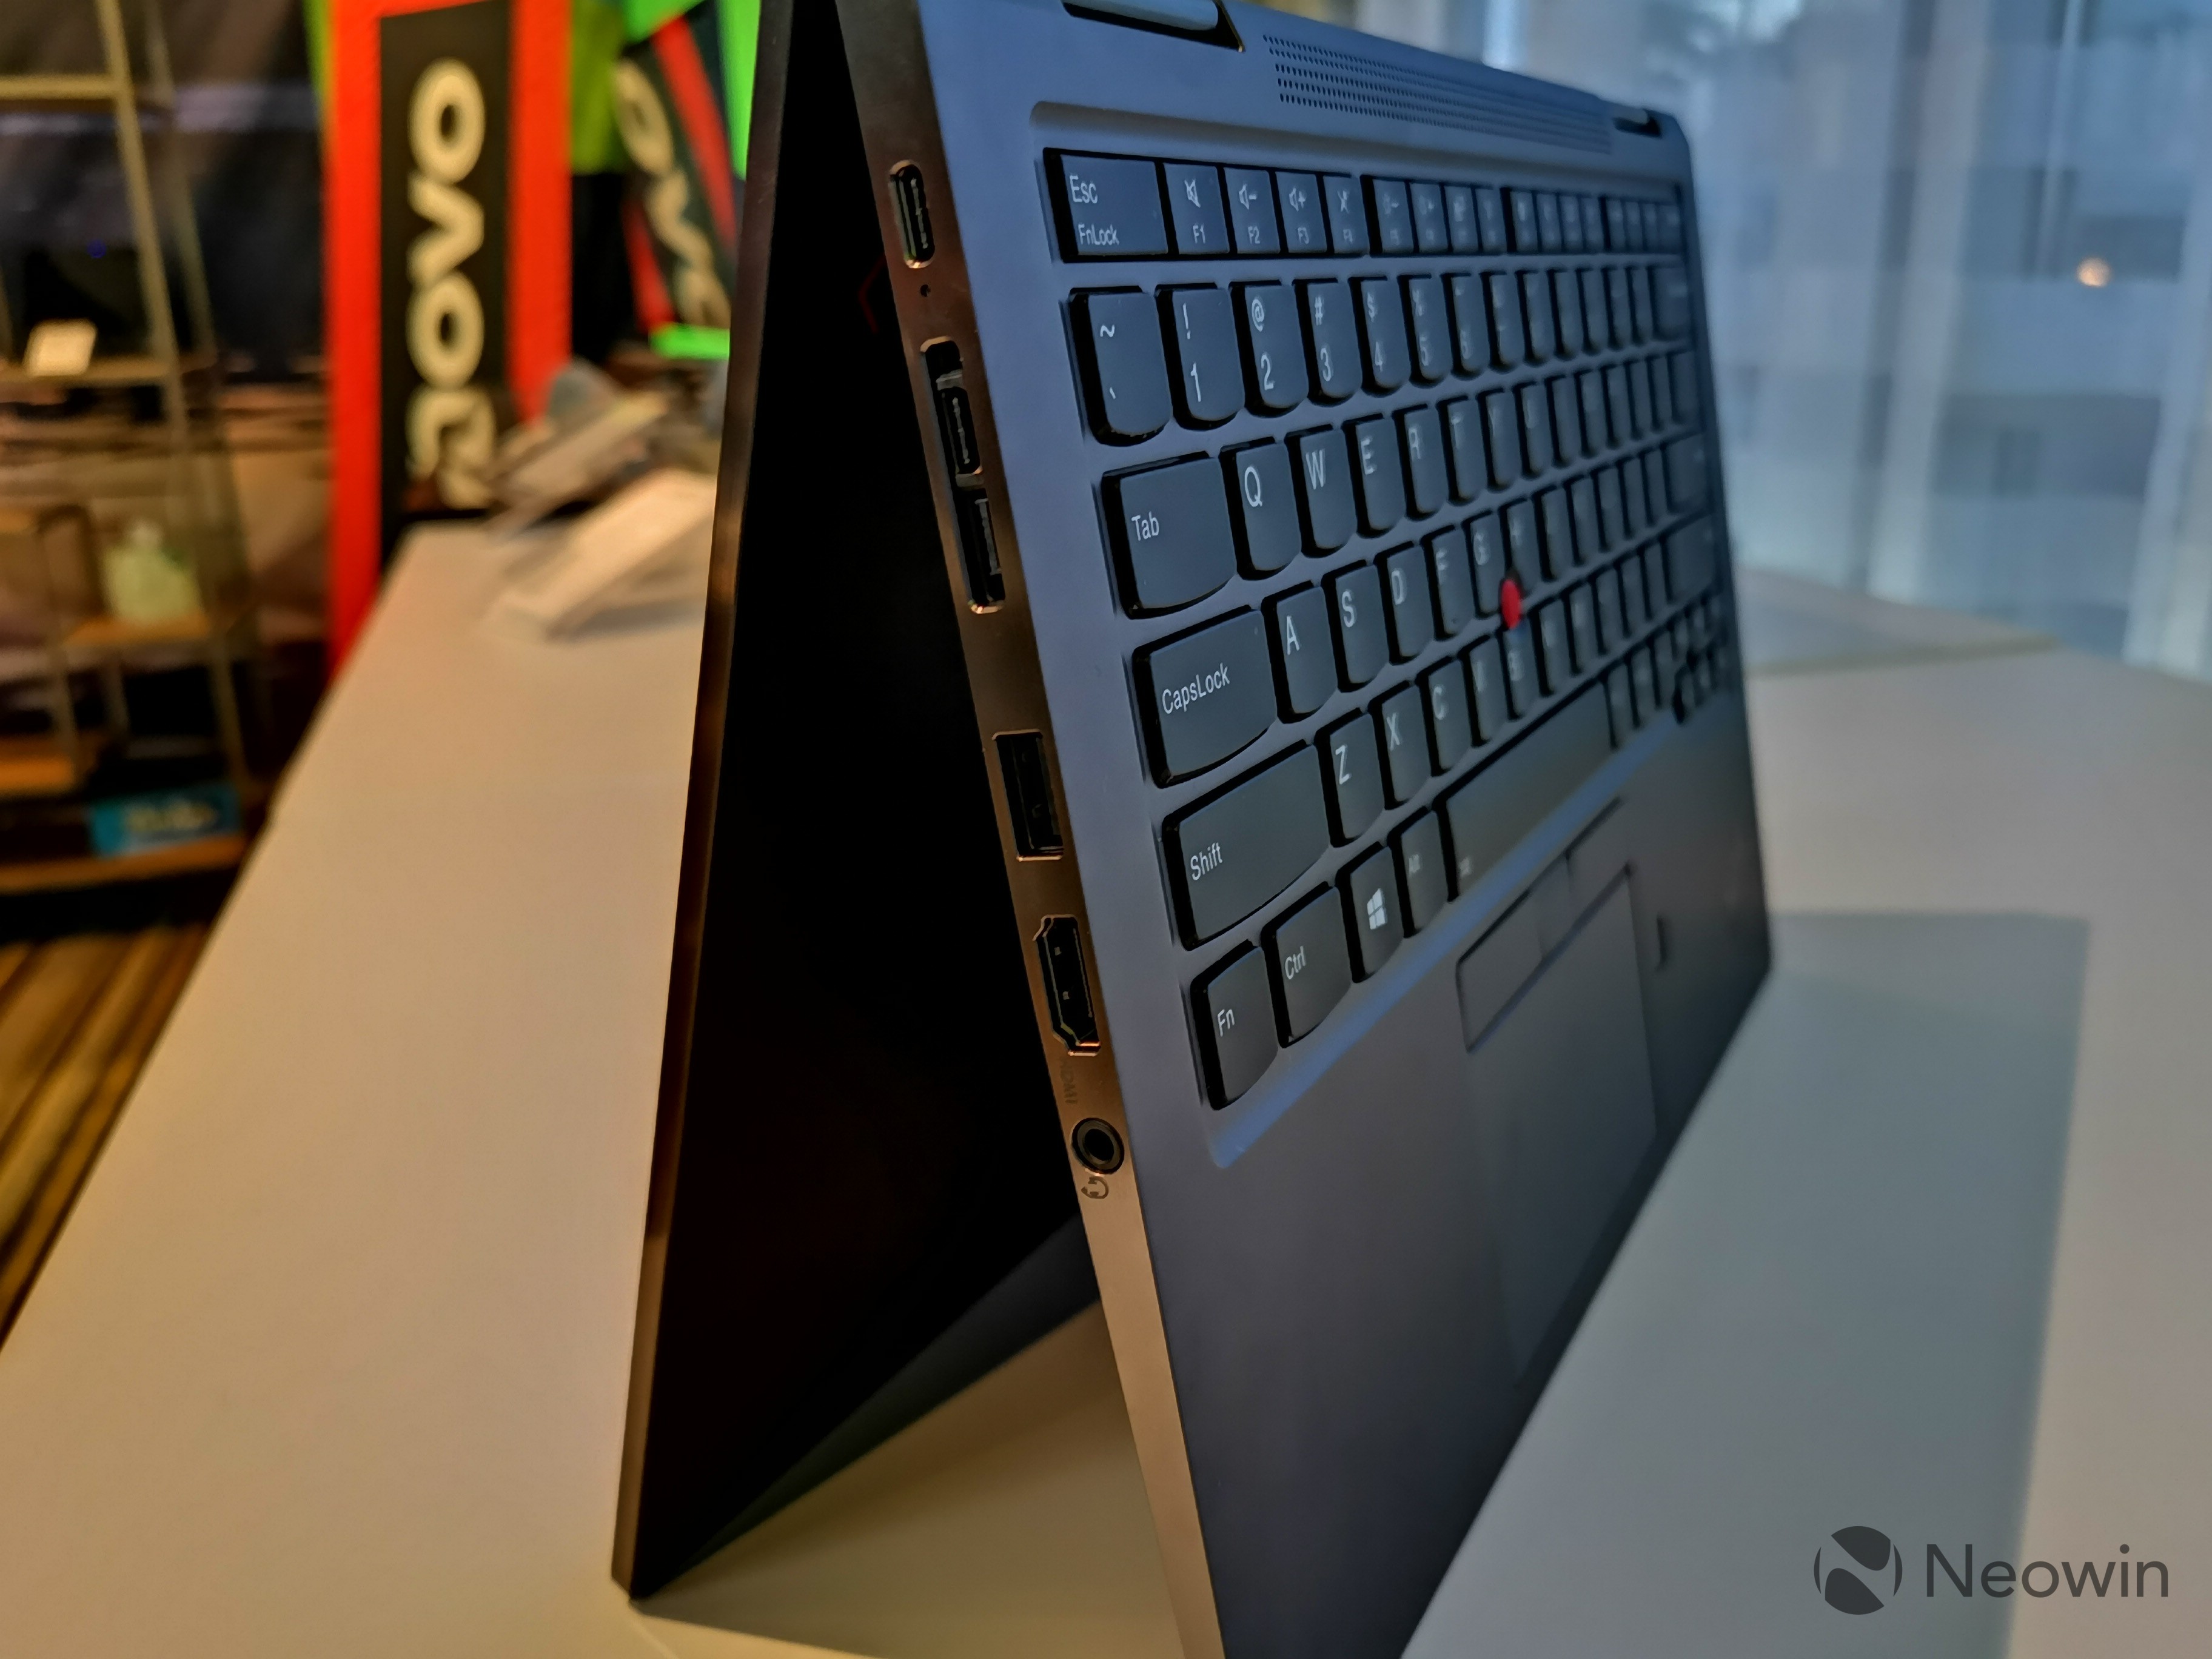 Hands on with Lenovo's new ThinkPad X1 Carbon and Yoga - Neowin